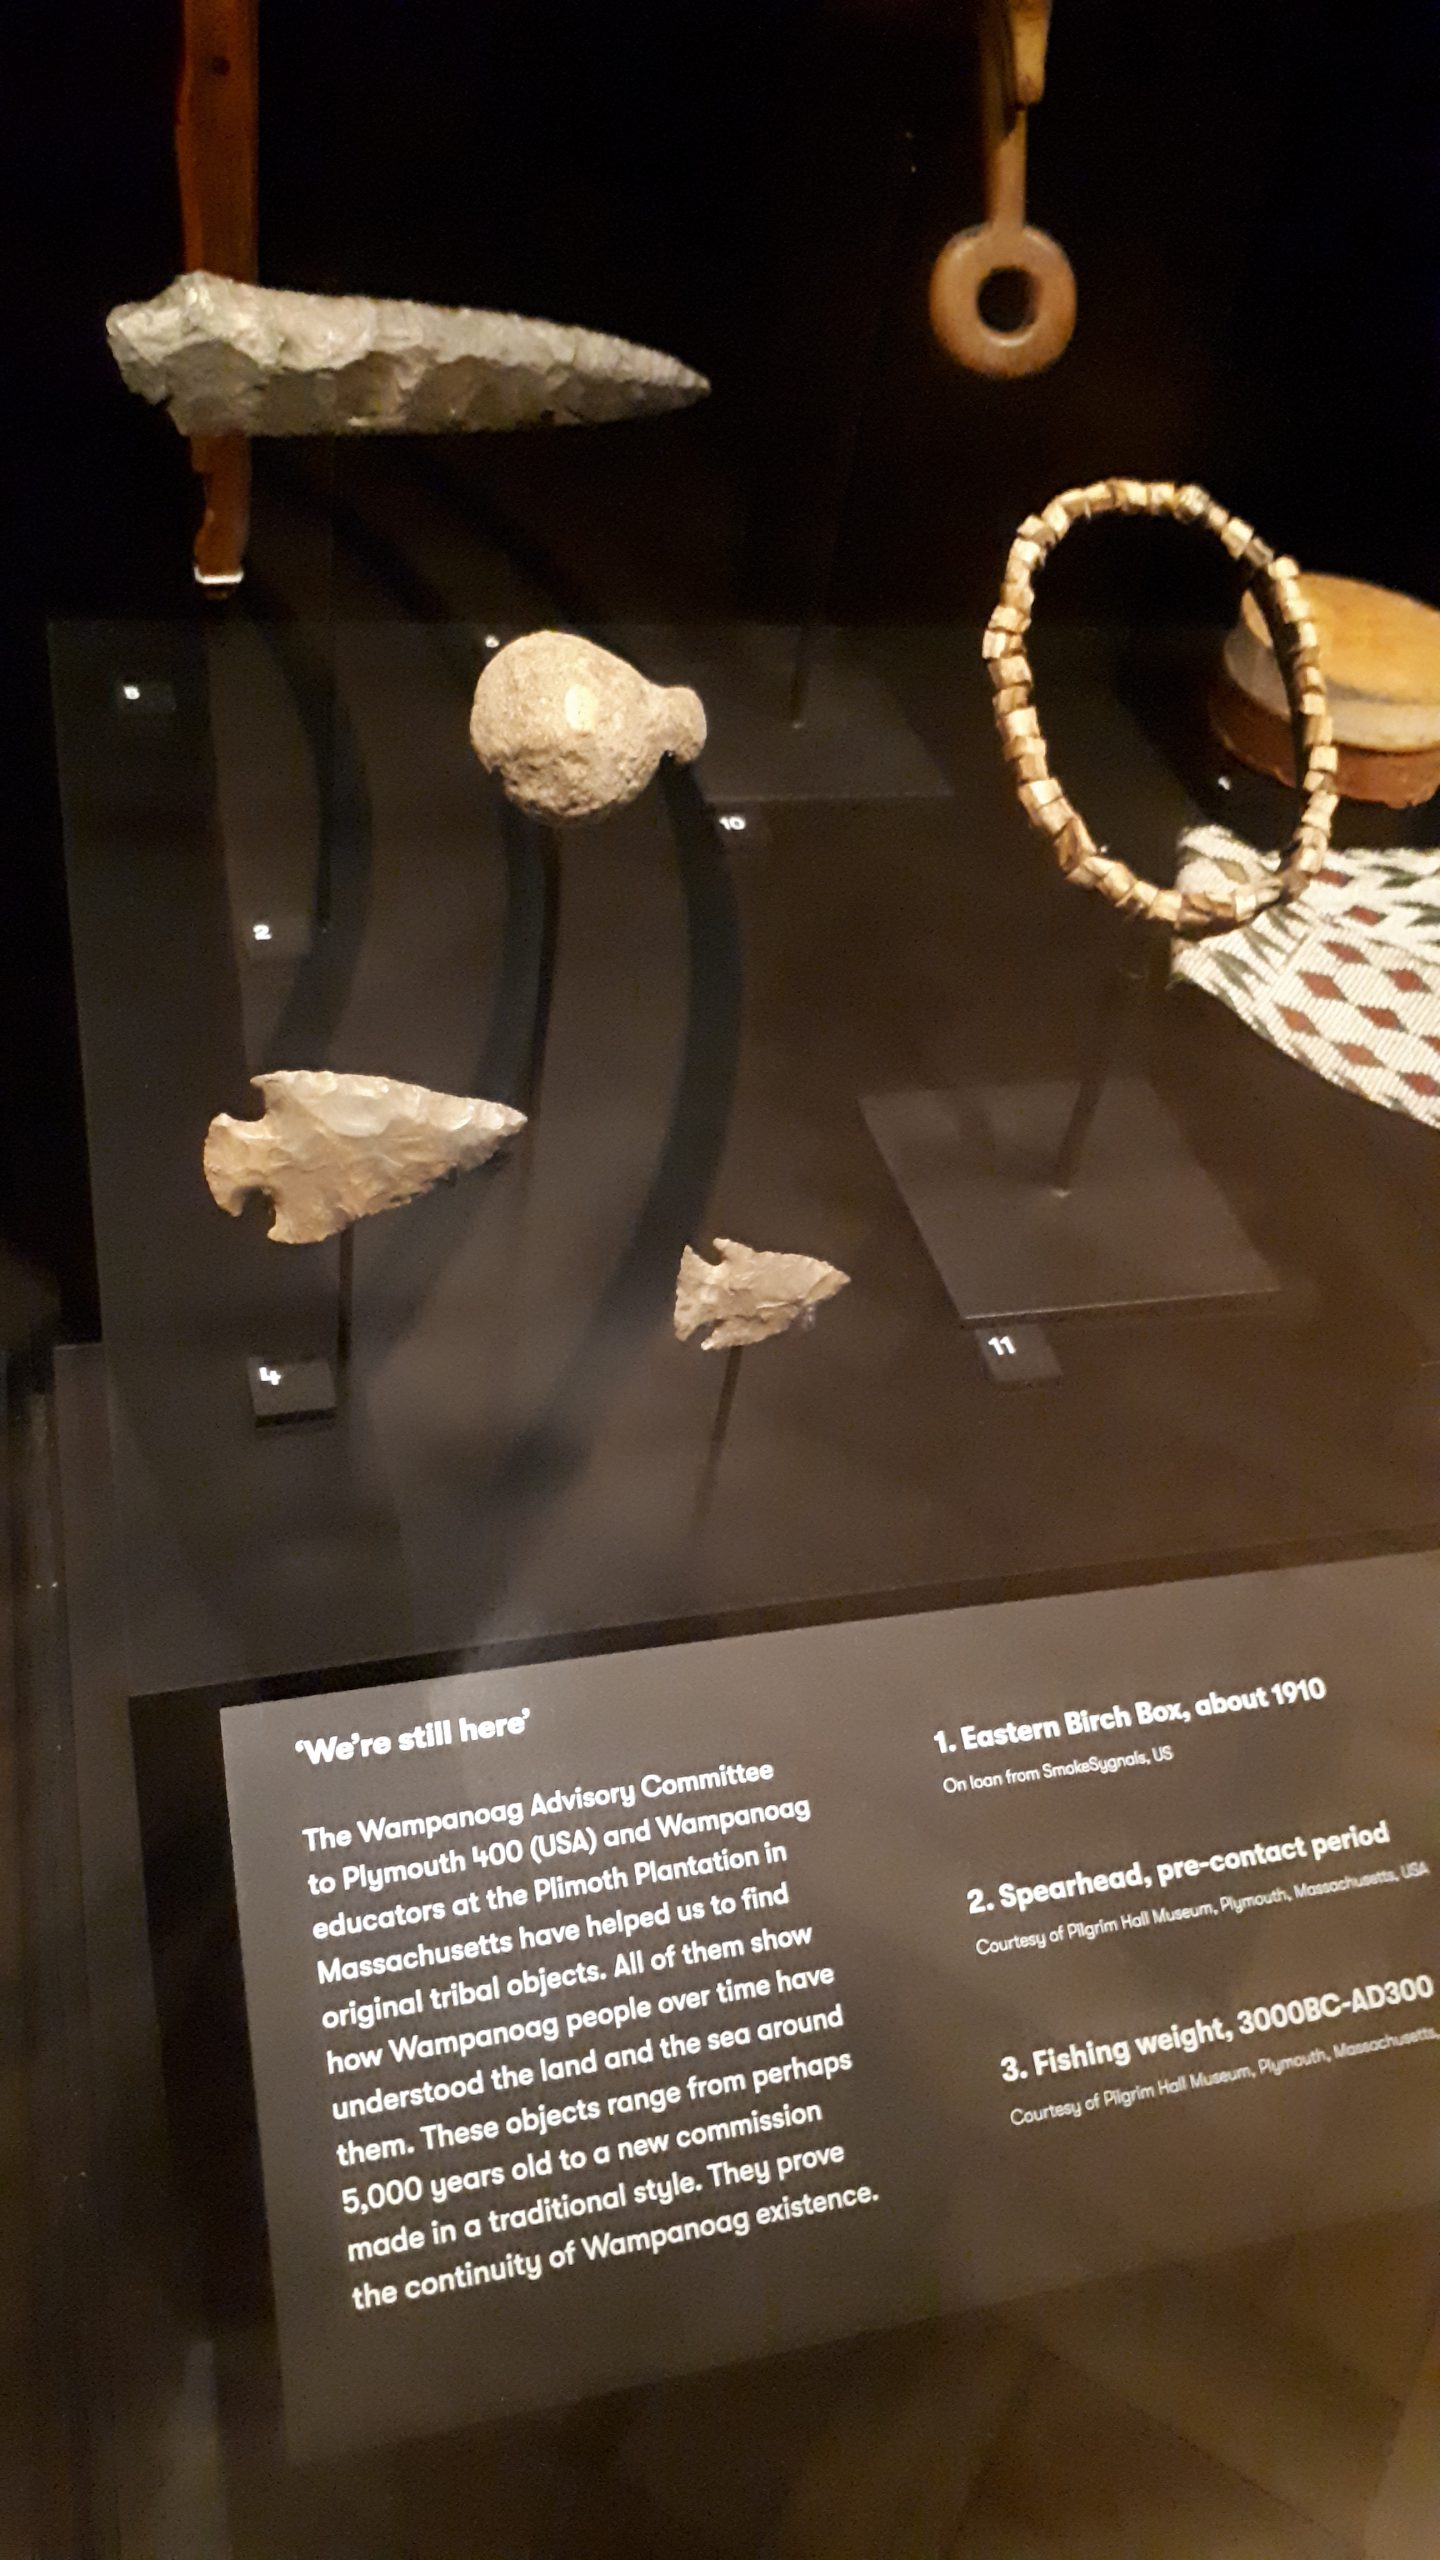 Examples of original Wampanoag tribal objects, some of which are as much as 5000 years old on display at Mayflower 400 at The Box, Plymouth. These included a fishing weight, spearhead, beaded sash and burden basket.